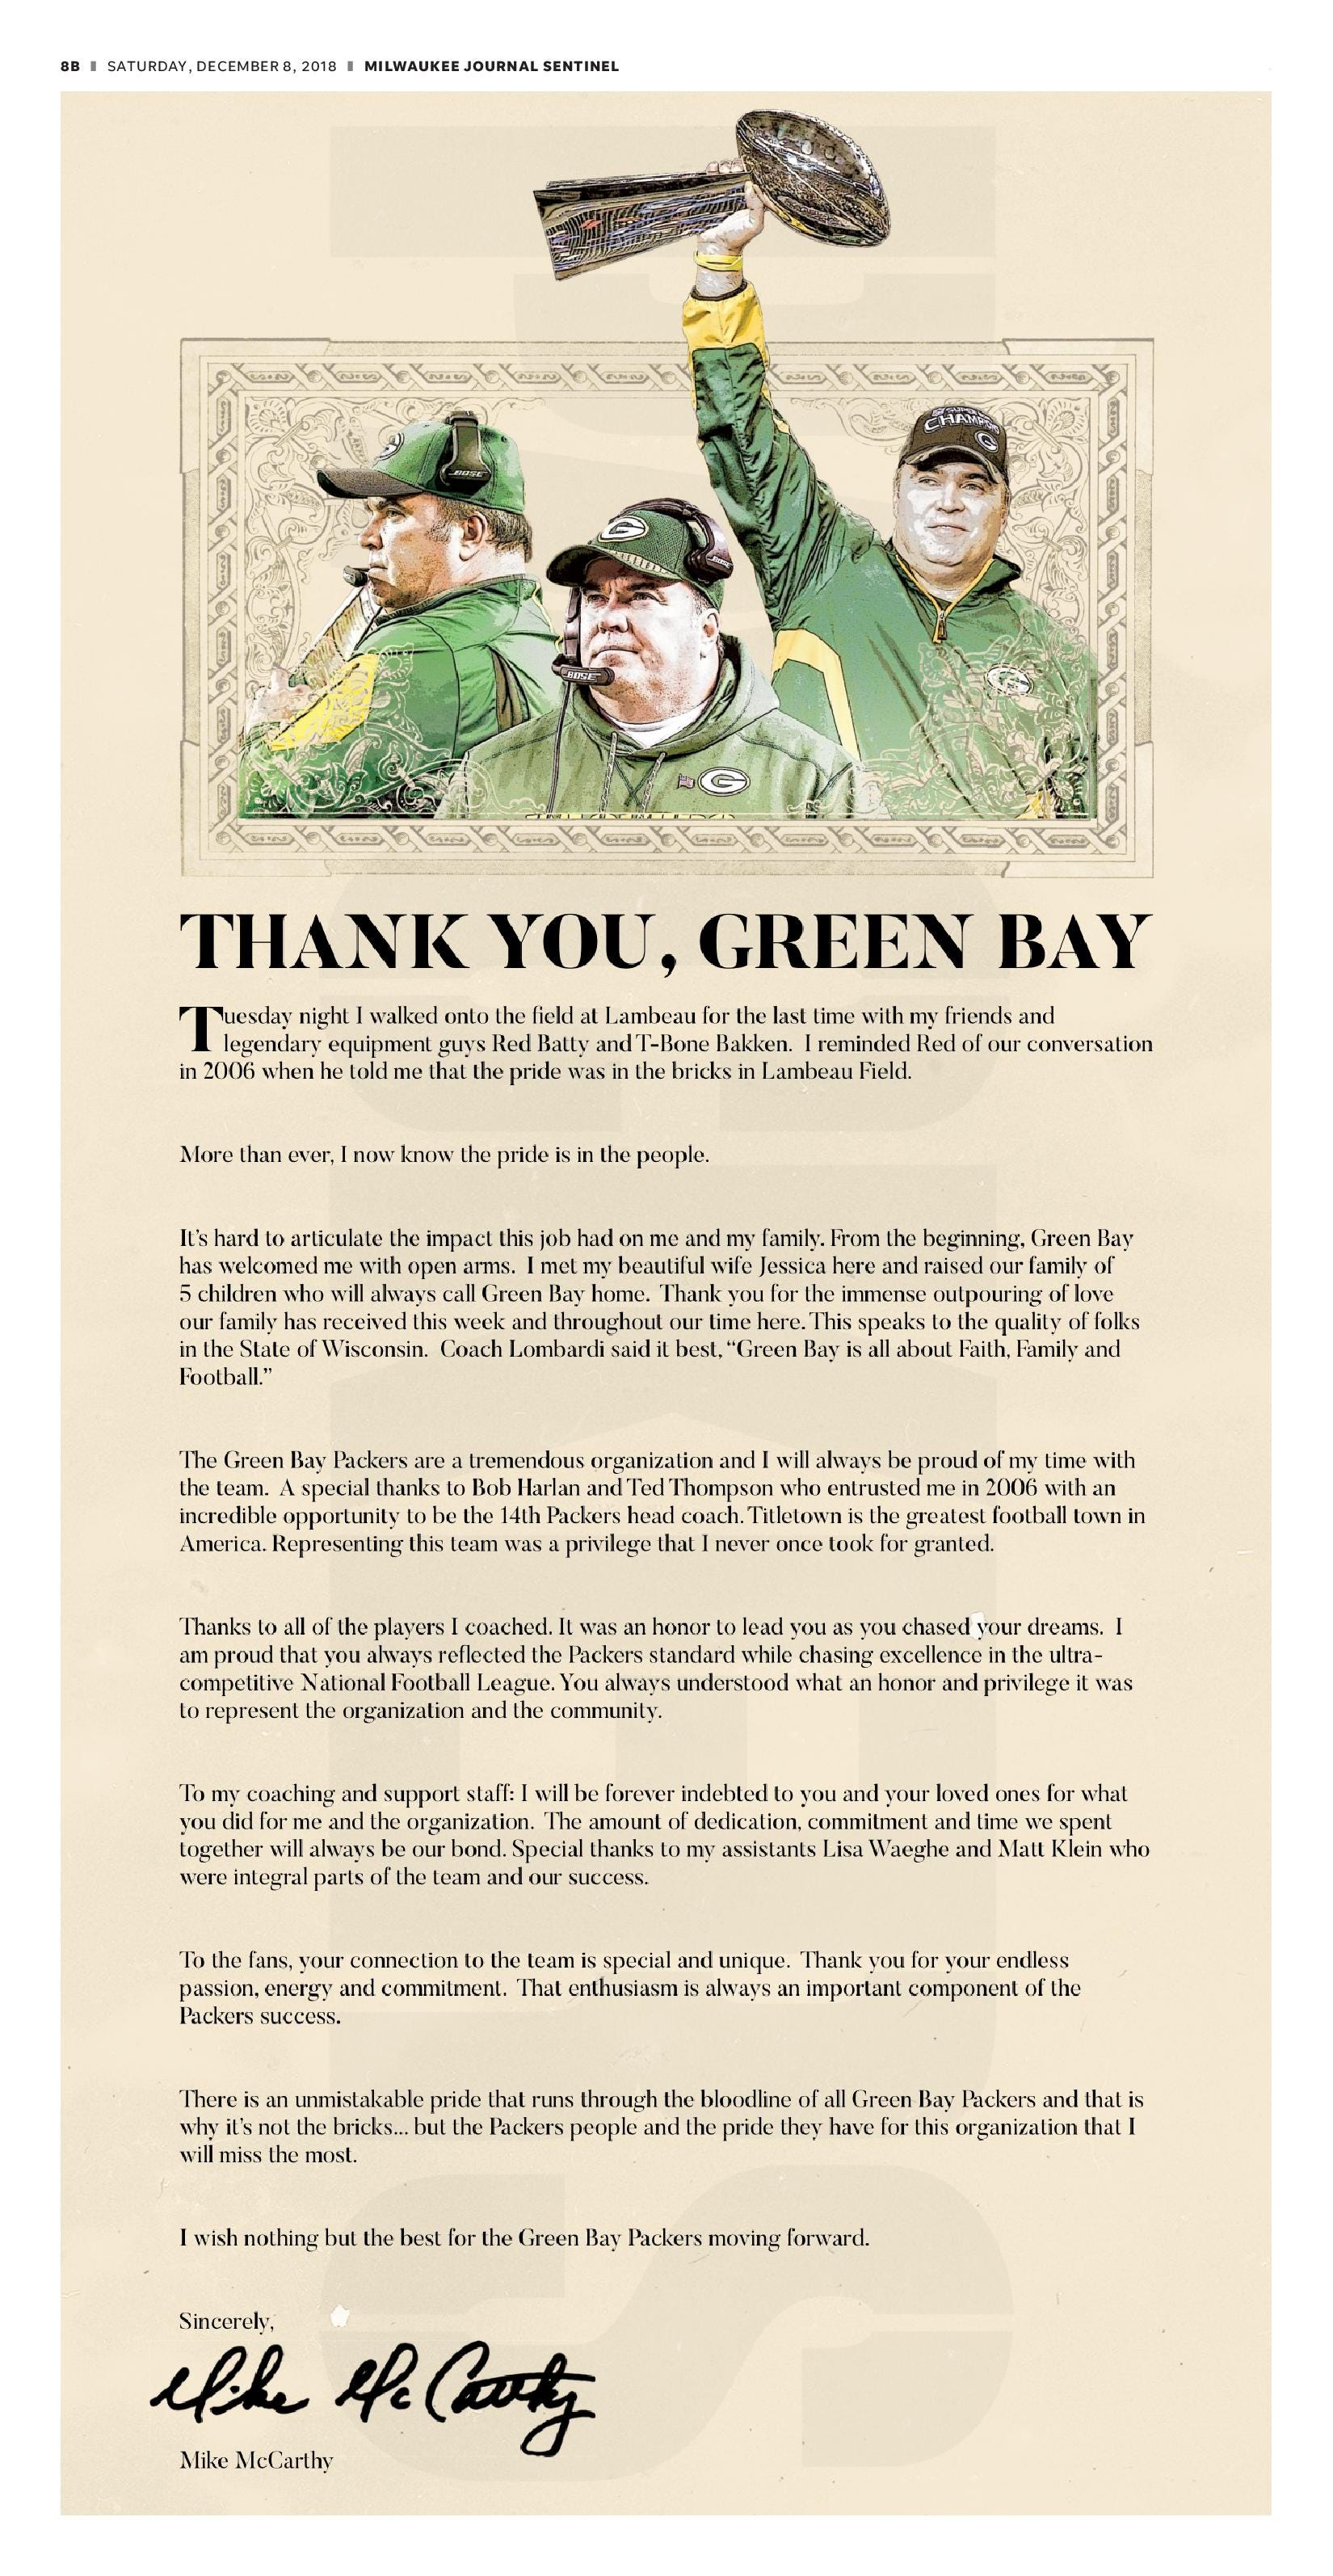 Mike McCarthy took out a full page advertisement thanking the fans of Green Bay.